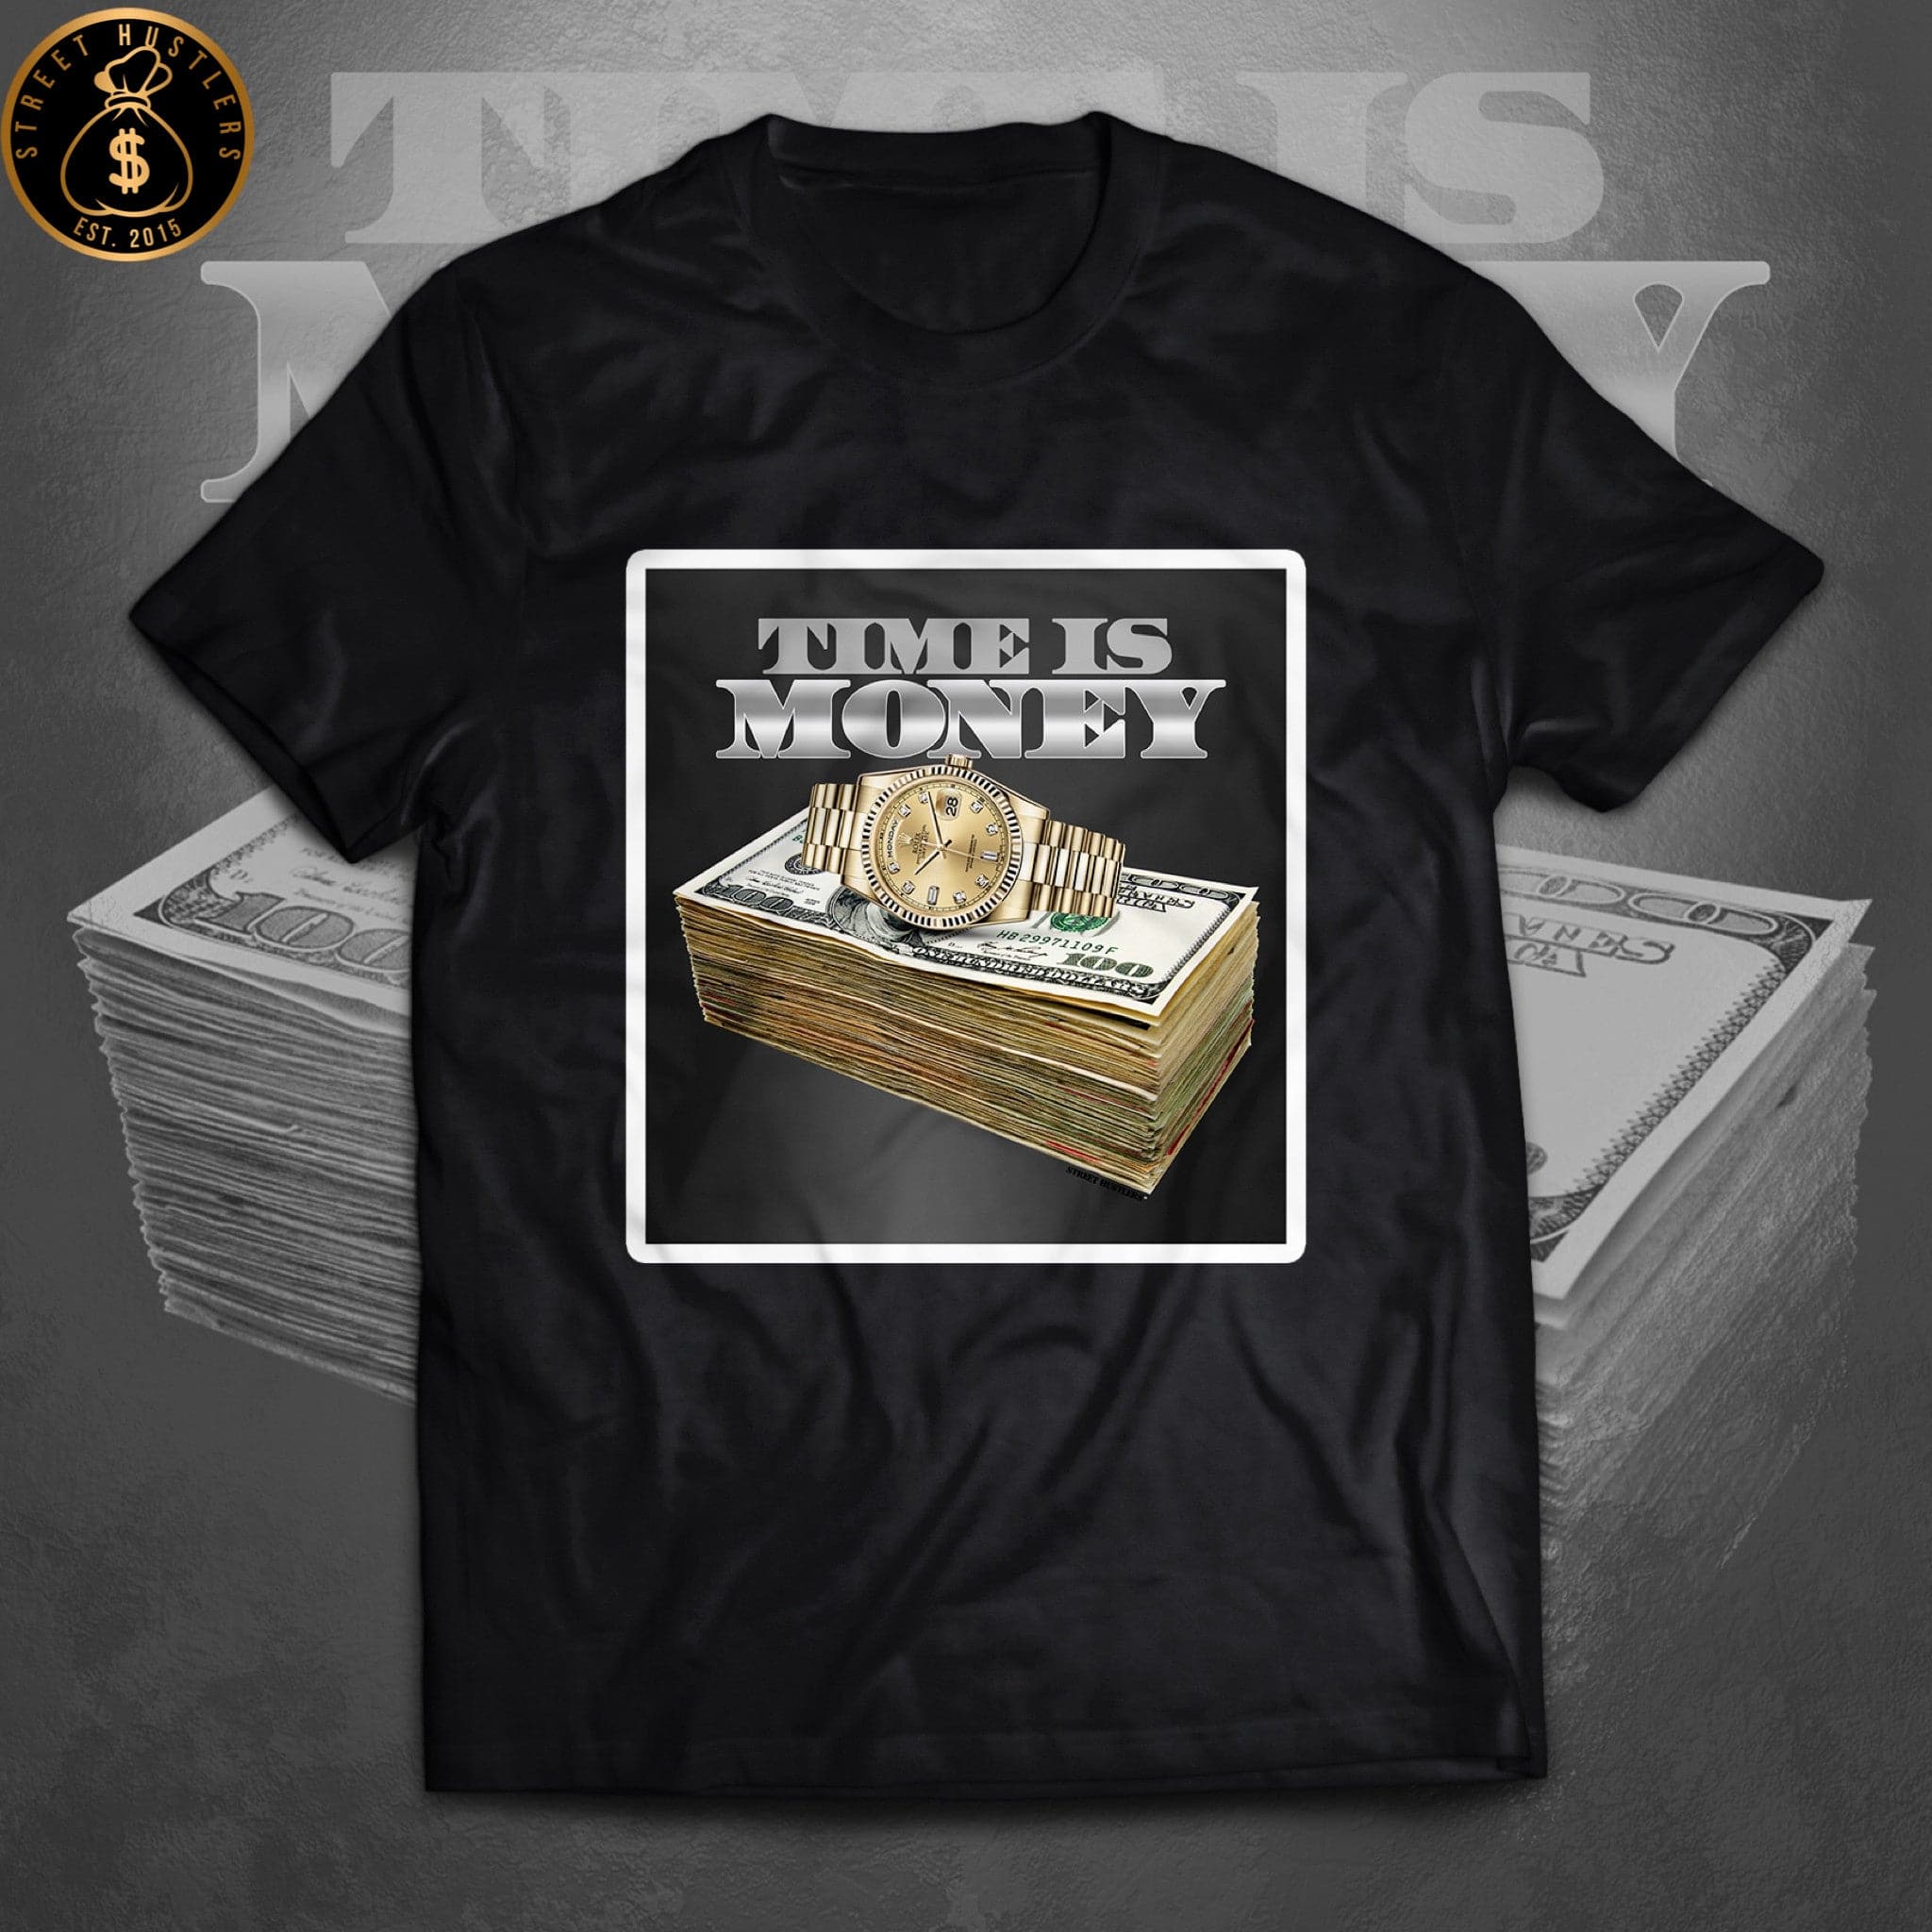 Time is Money. Tee